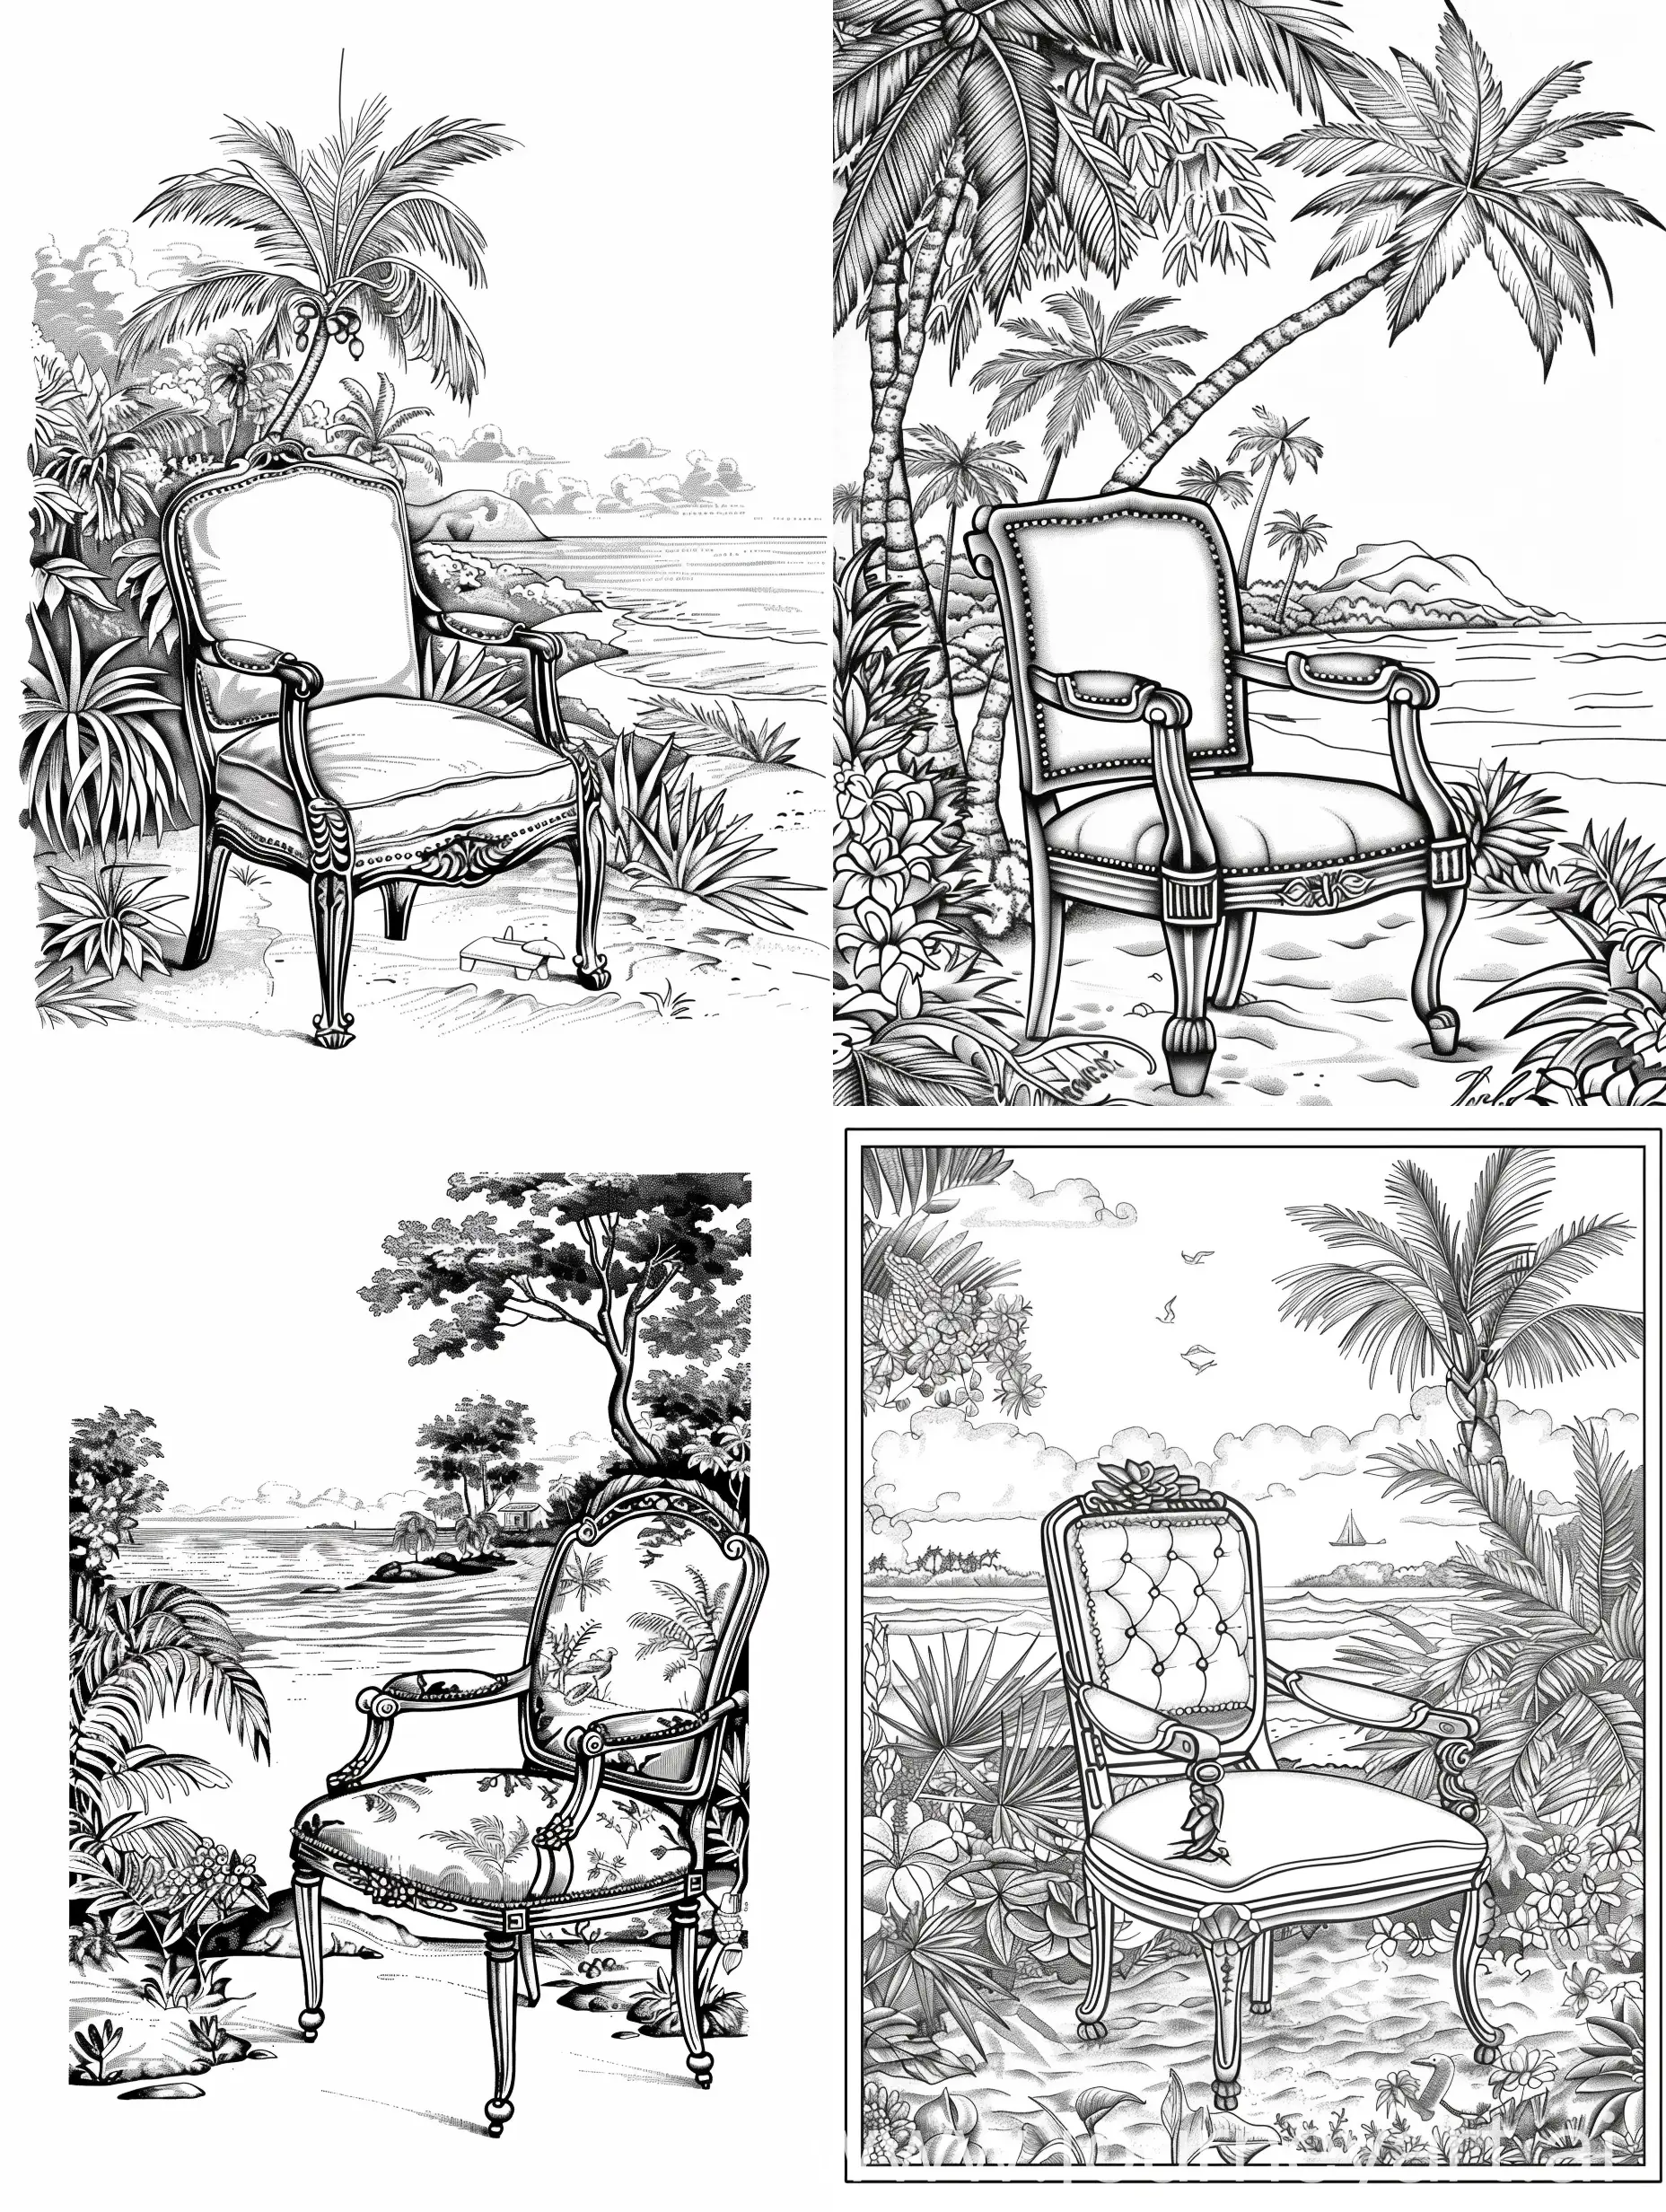 ColonialEra-Chair-and-Beach-Scenes-in-Black-and-White